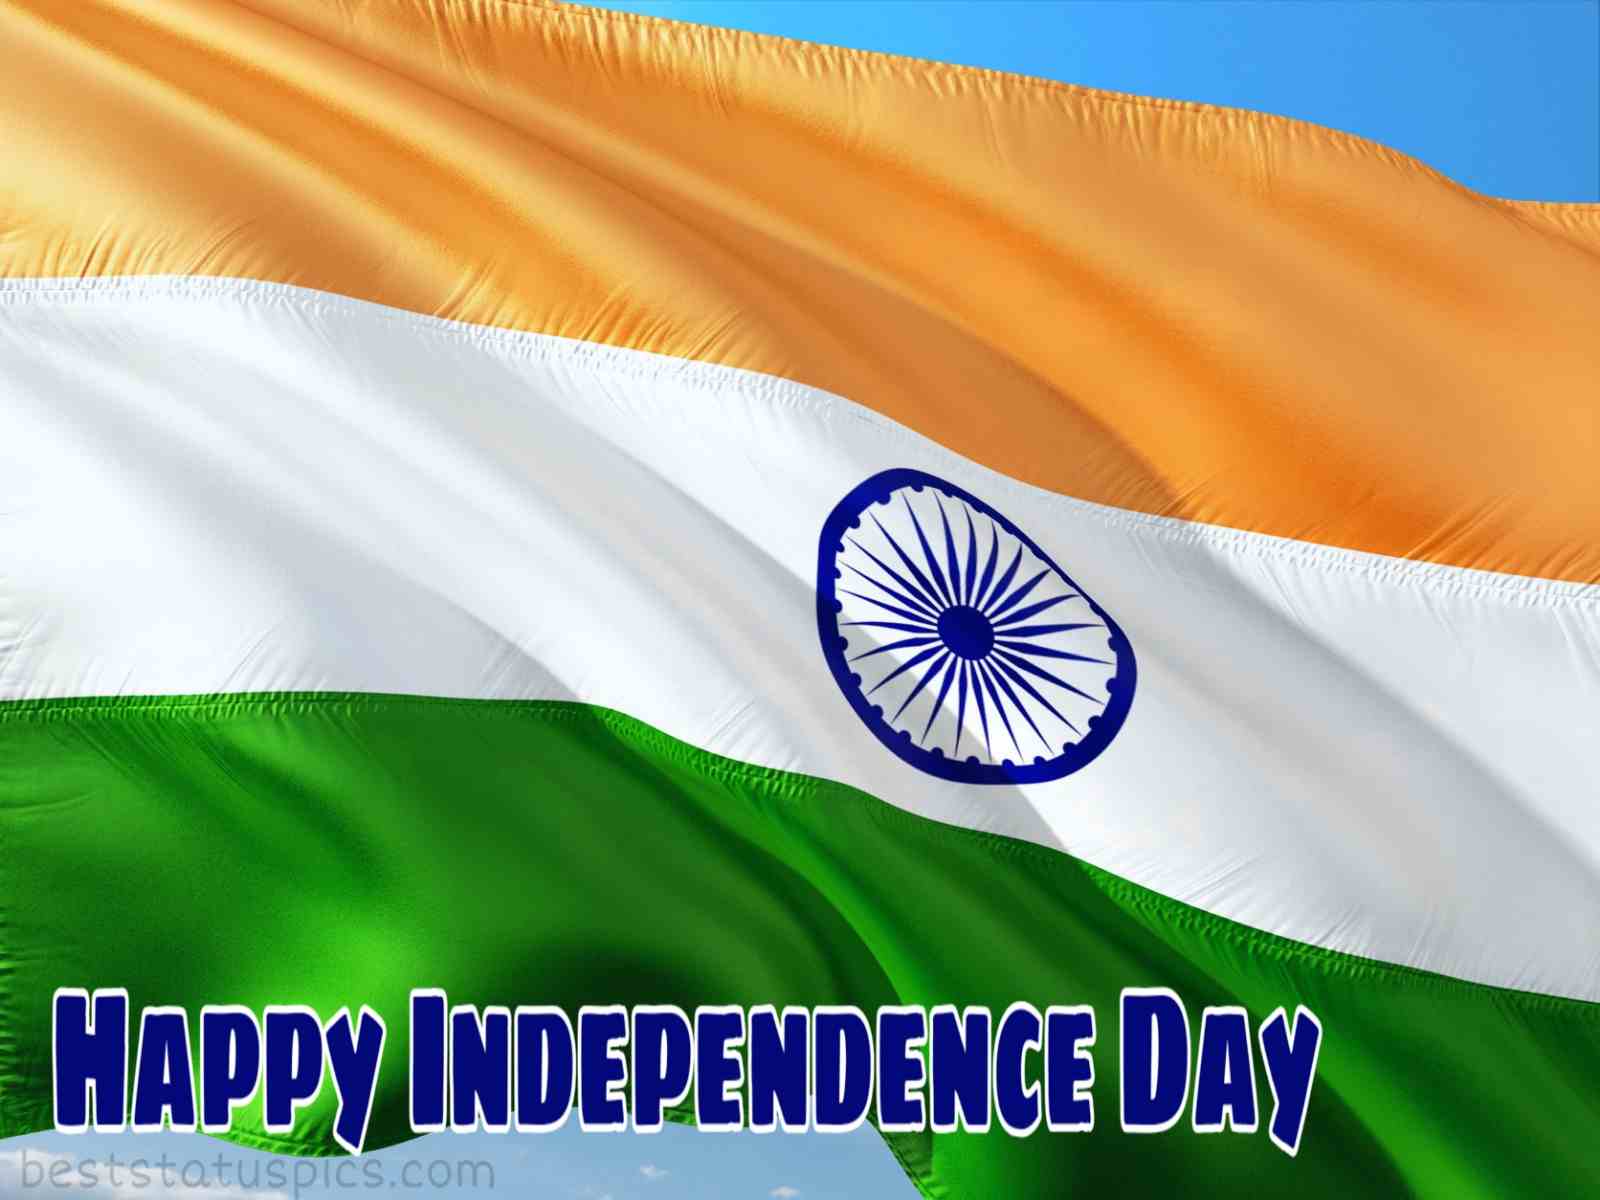 Happy India Independence Day 2022 Wishes Image, Quotes Status Pics